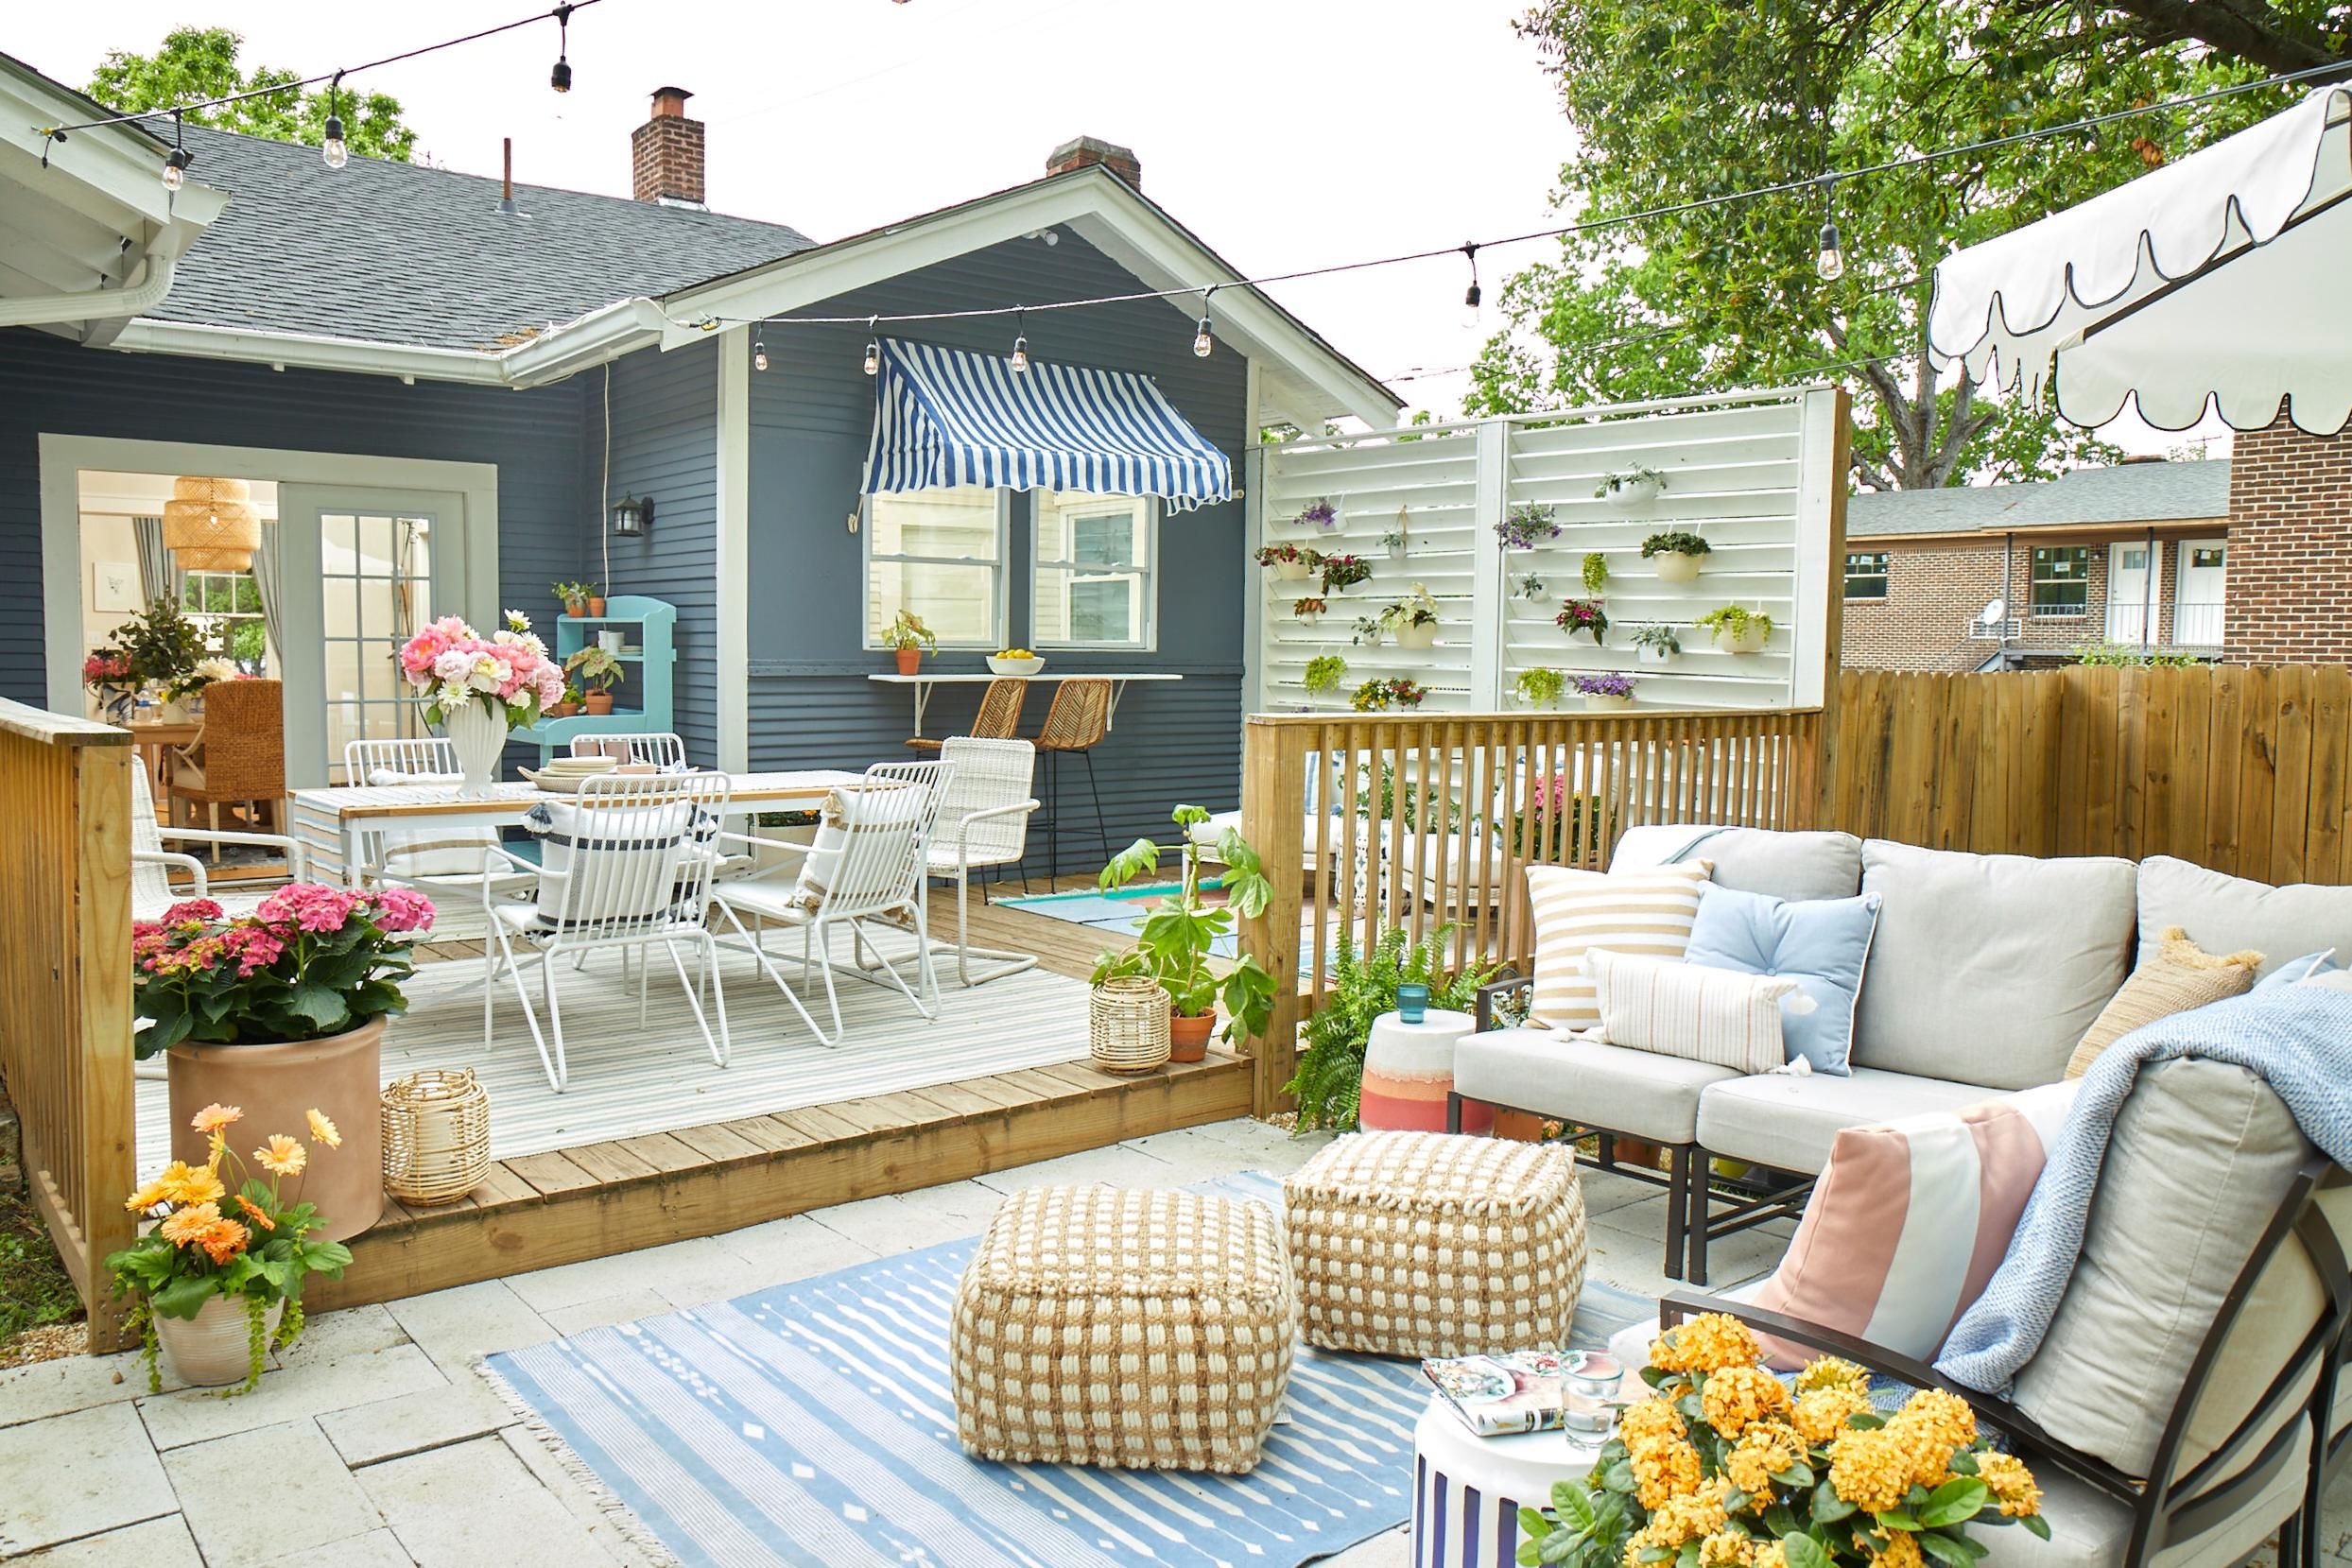 50 Best Patio And Porch Design Ideas, Backyard Covered Patio Decorating Ideas